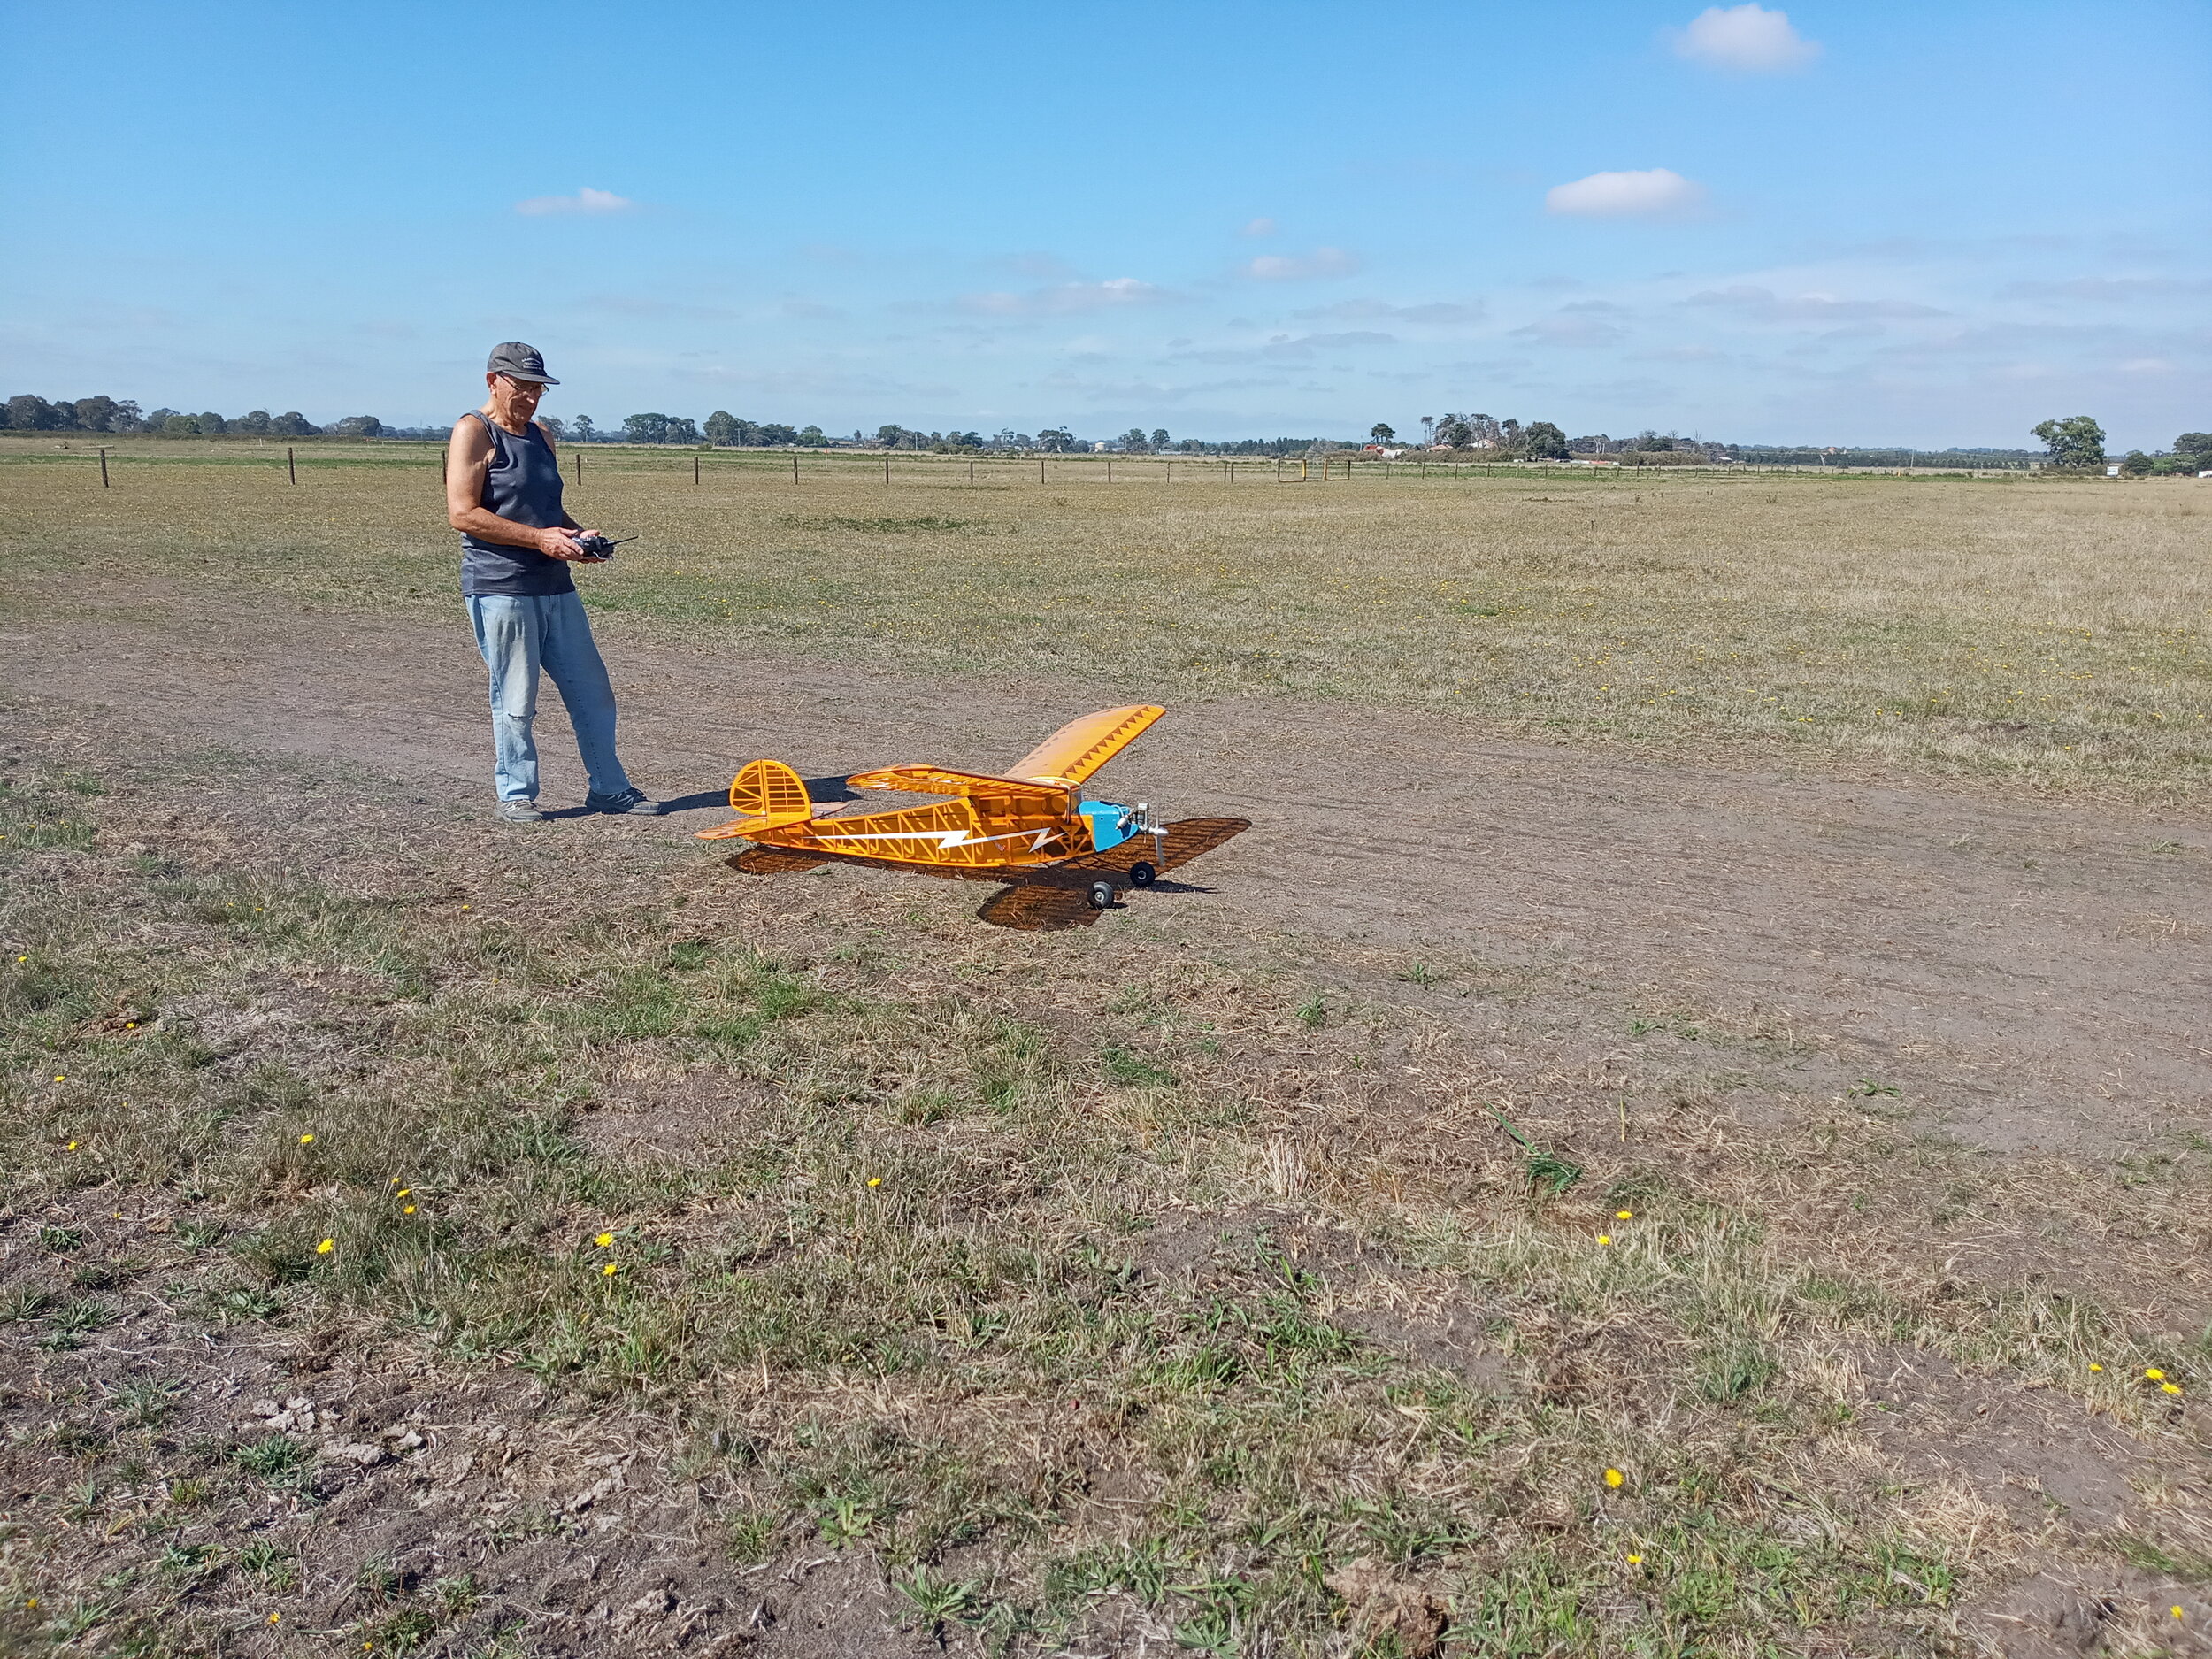  31/3  Dino flies his scratch built Old Timer from Rod’s temporary runway at MX. 